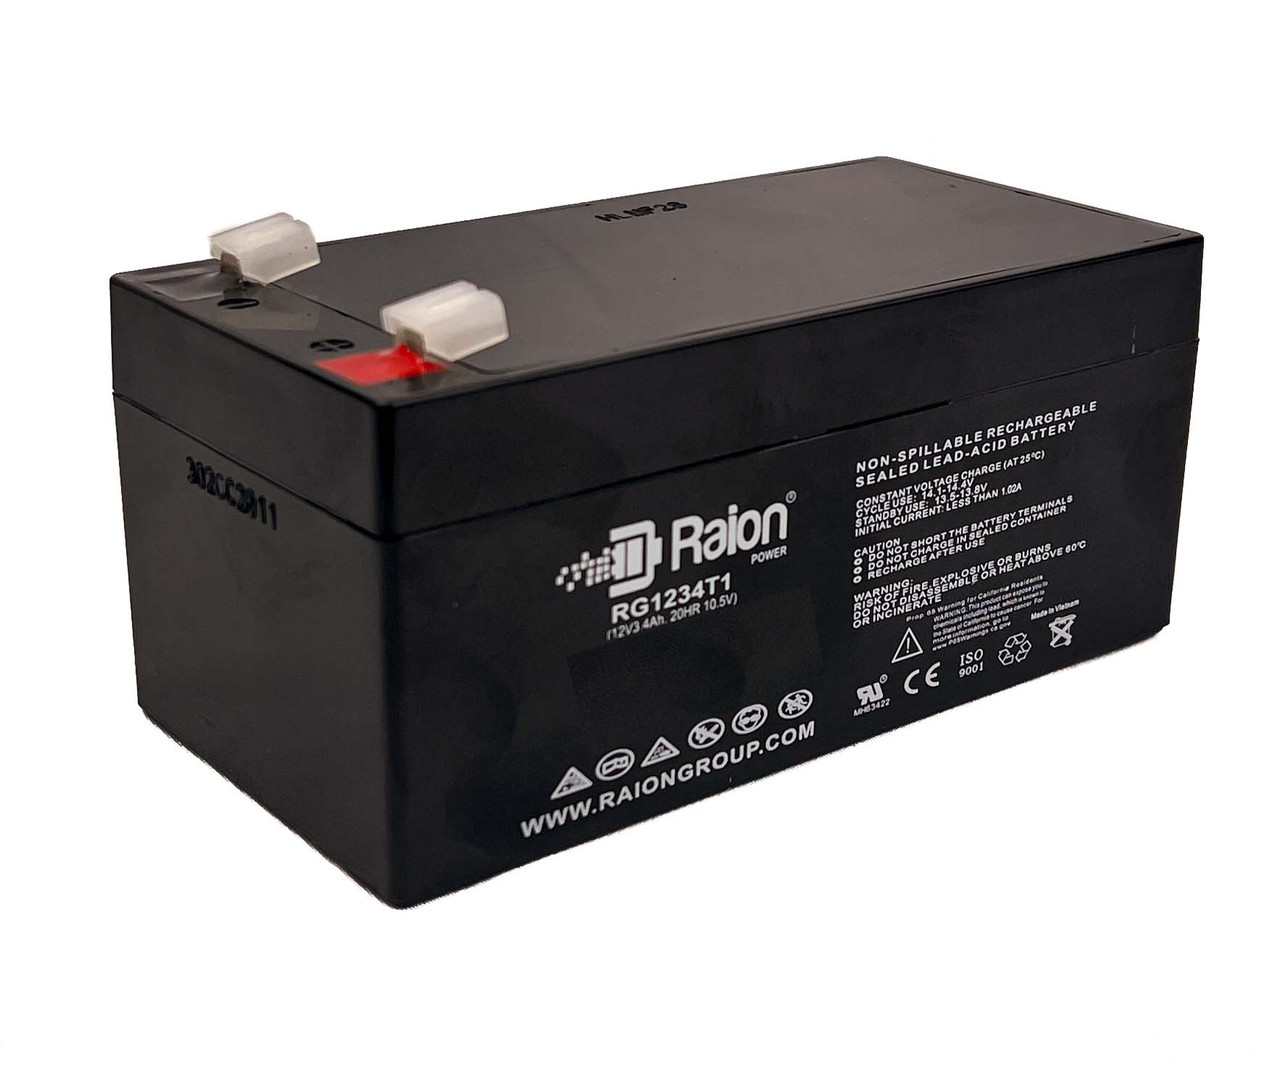 Raion Power 12V 3.4Ah Non-Spillable Replacement Battery for Alexander MB5384